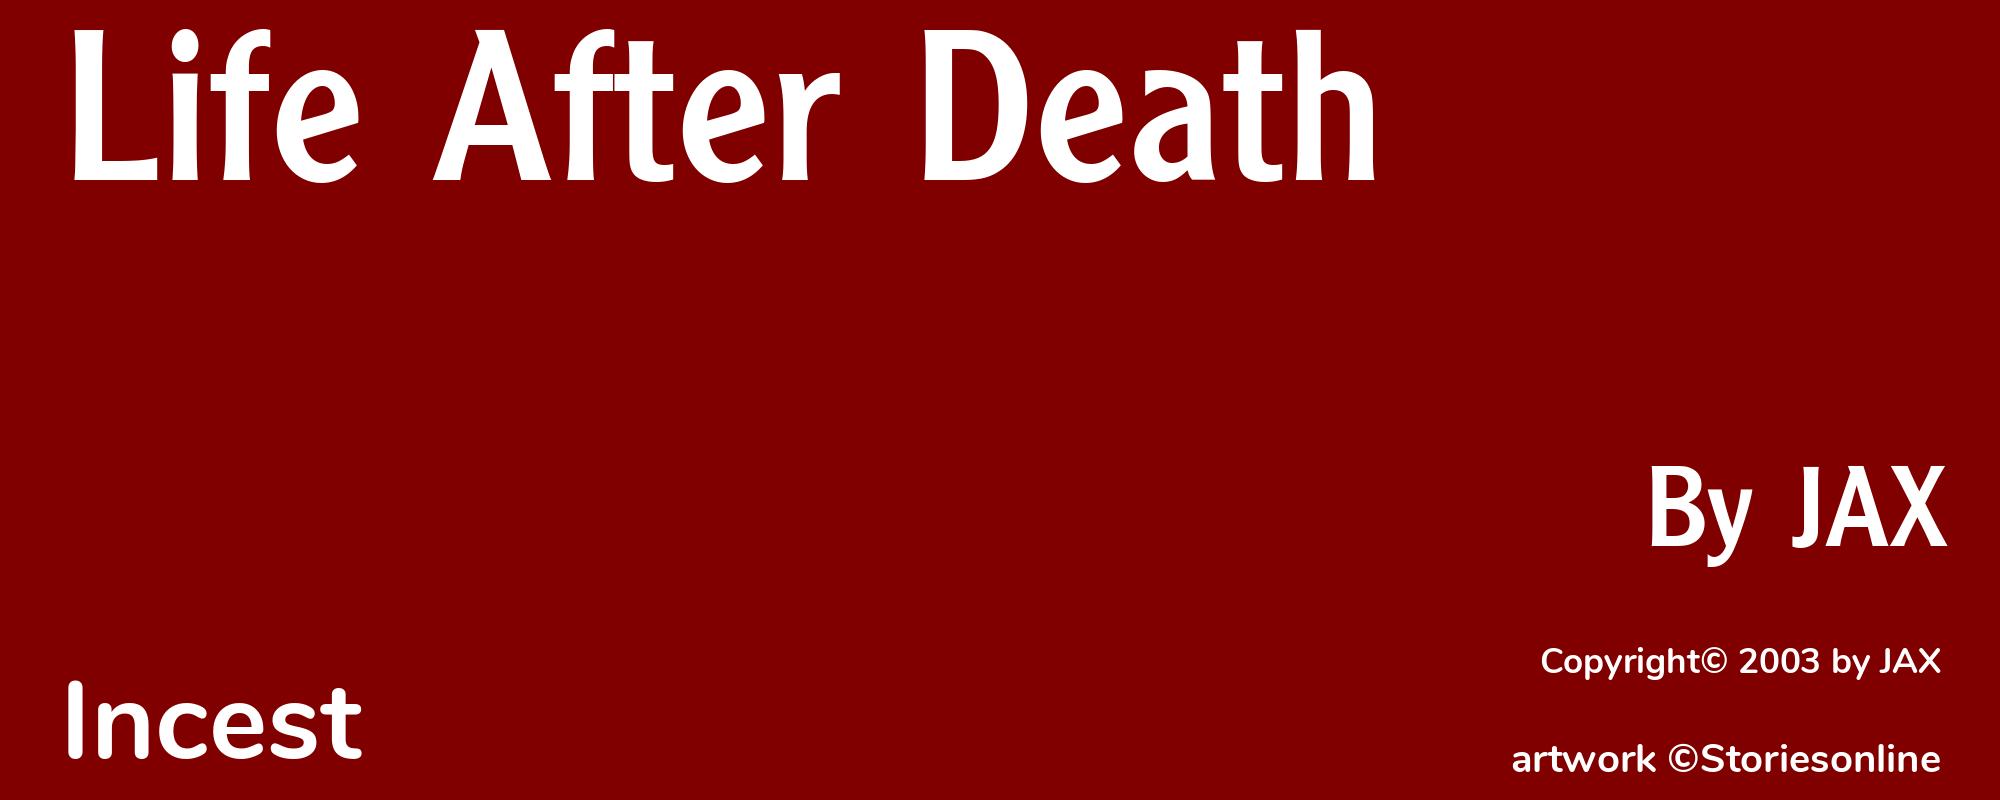 Life After Death - Cover